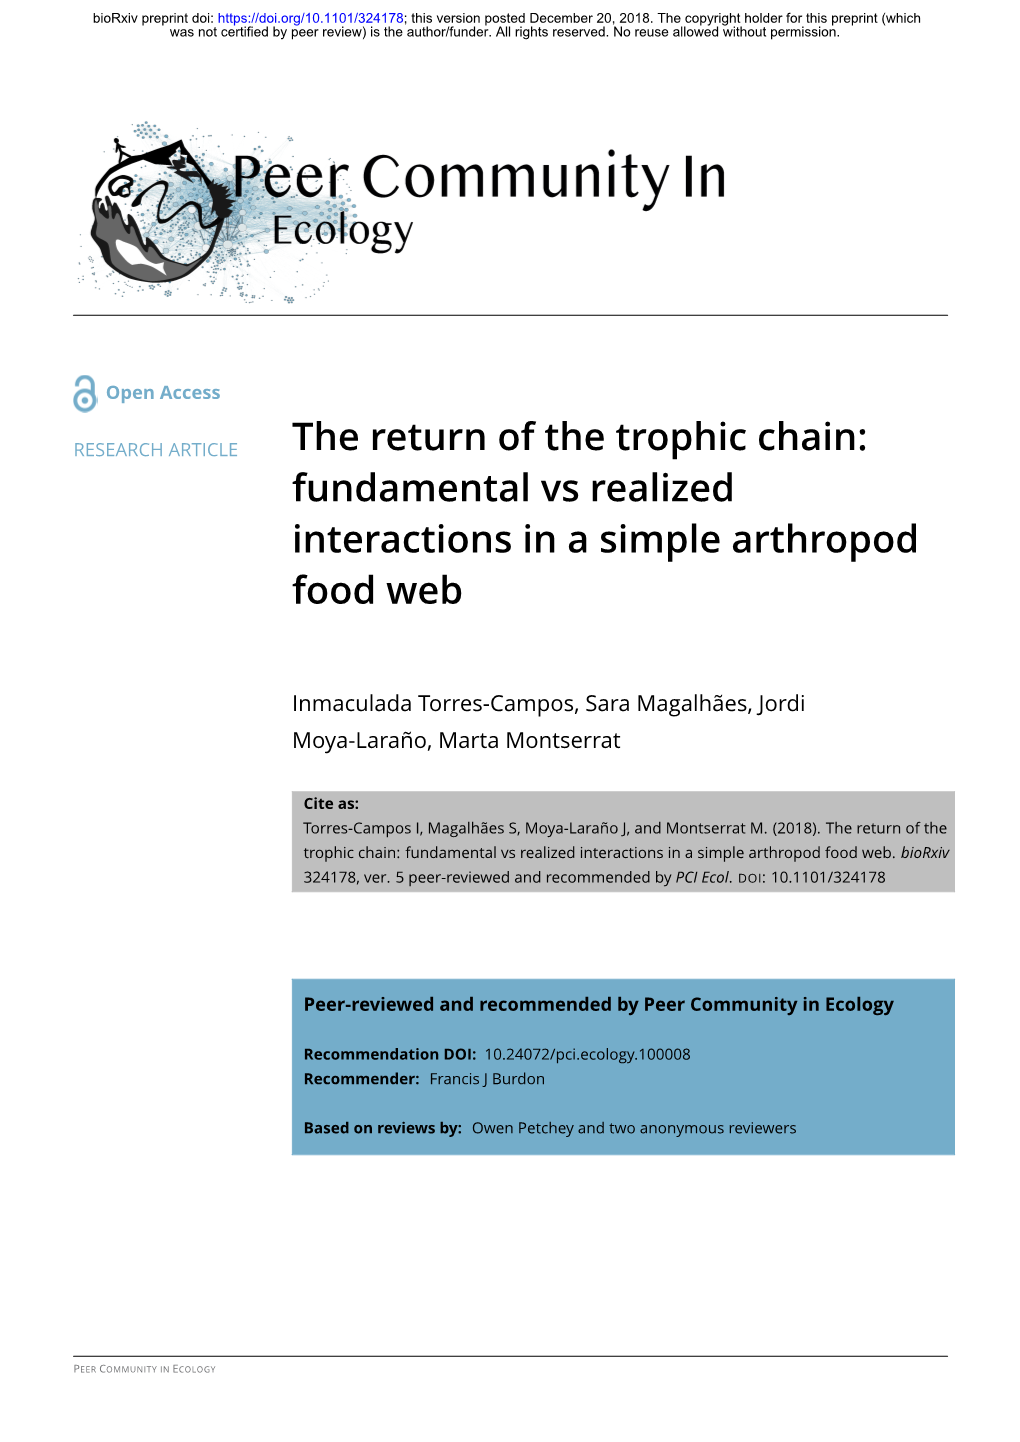 The Return of the Trophic Chain: Fundamental Vs Realized Interactions in a Simple Arthropod Food Web